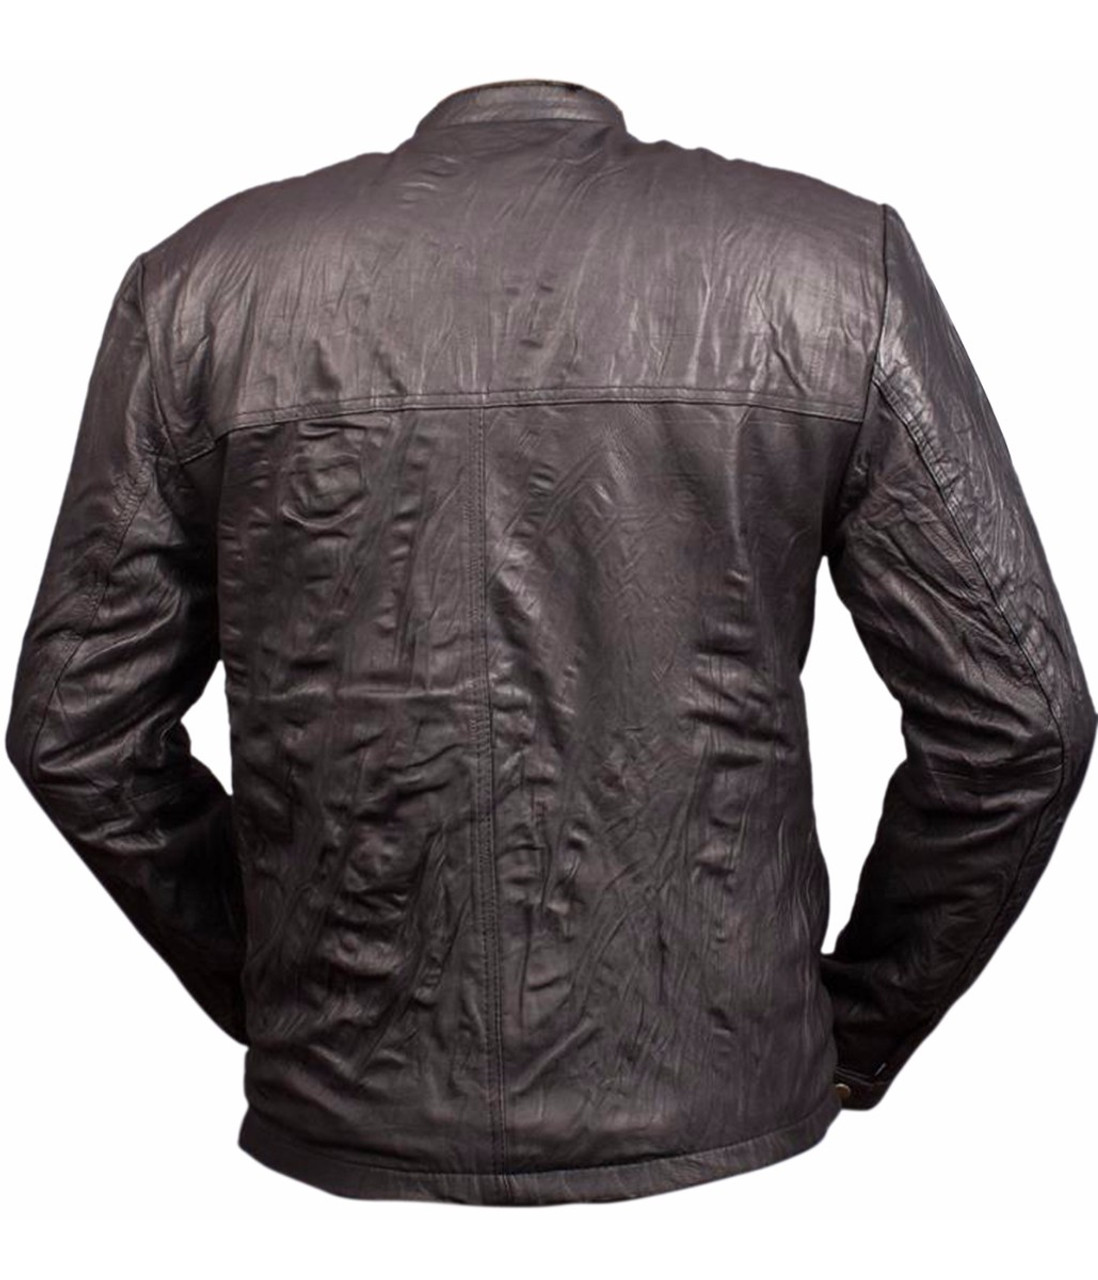 17 Again Zac Efron Oblow Wrinkled Leather Jacket | Feather Skin